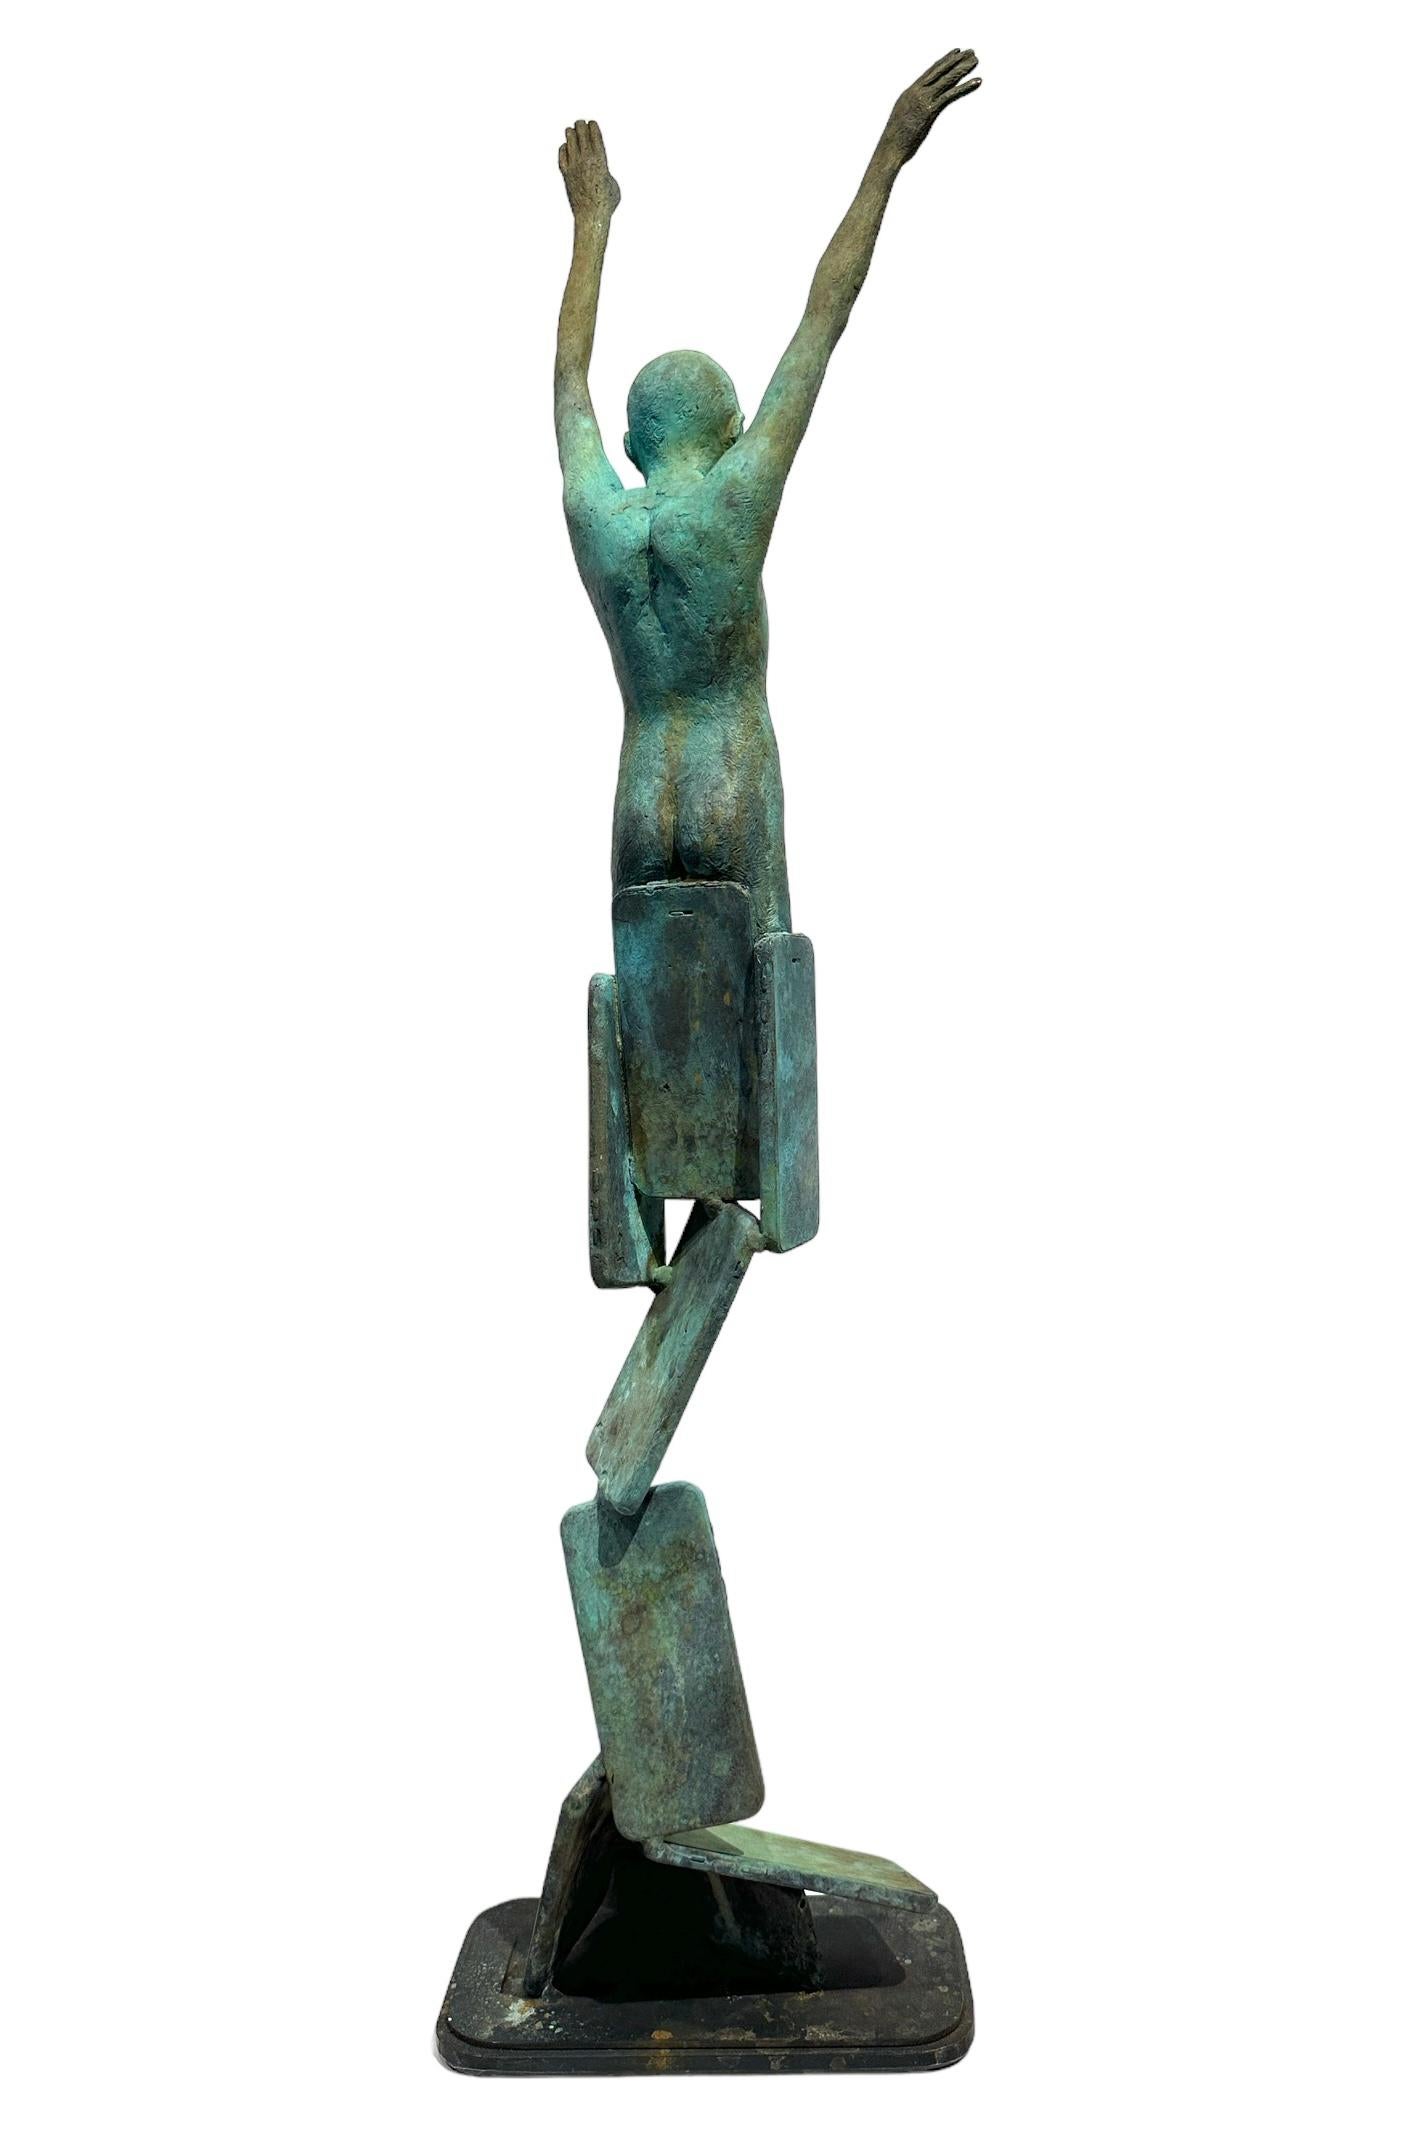 Jesús Curiá Perez
Conectados VI
bronze
29h x 9w x 5.50d in
73.66h x 22.86w x 13.97d cm
ed. 1 of 8
JCP051

Jesús Curiá's sculptures arouse something more than purely aesthetic pleasure. We can analyze his work rationally and emphasize the quality of